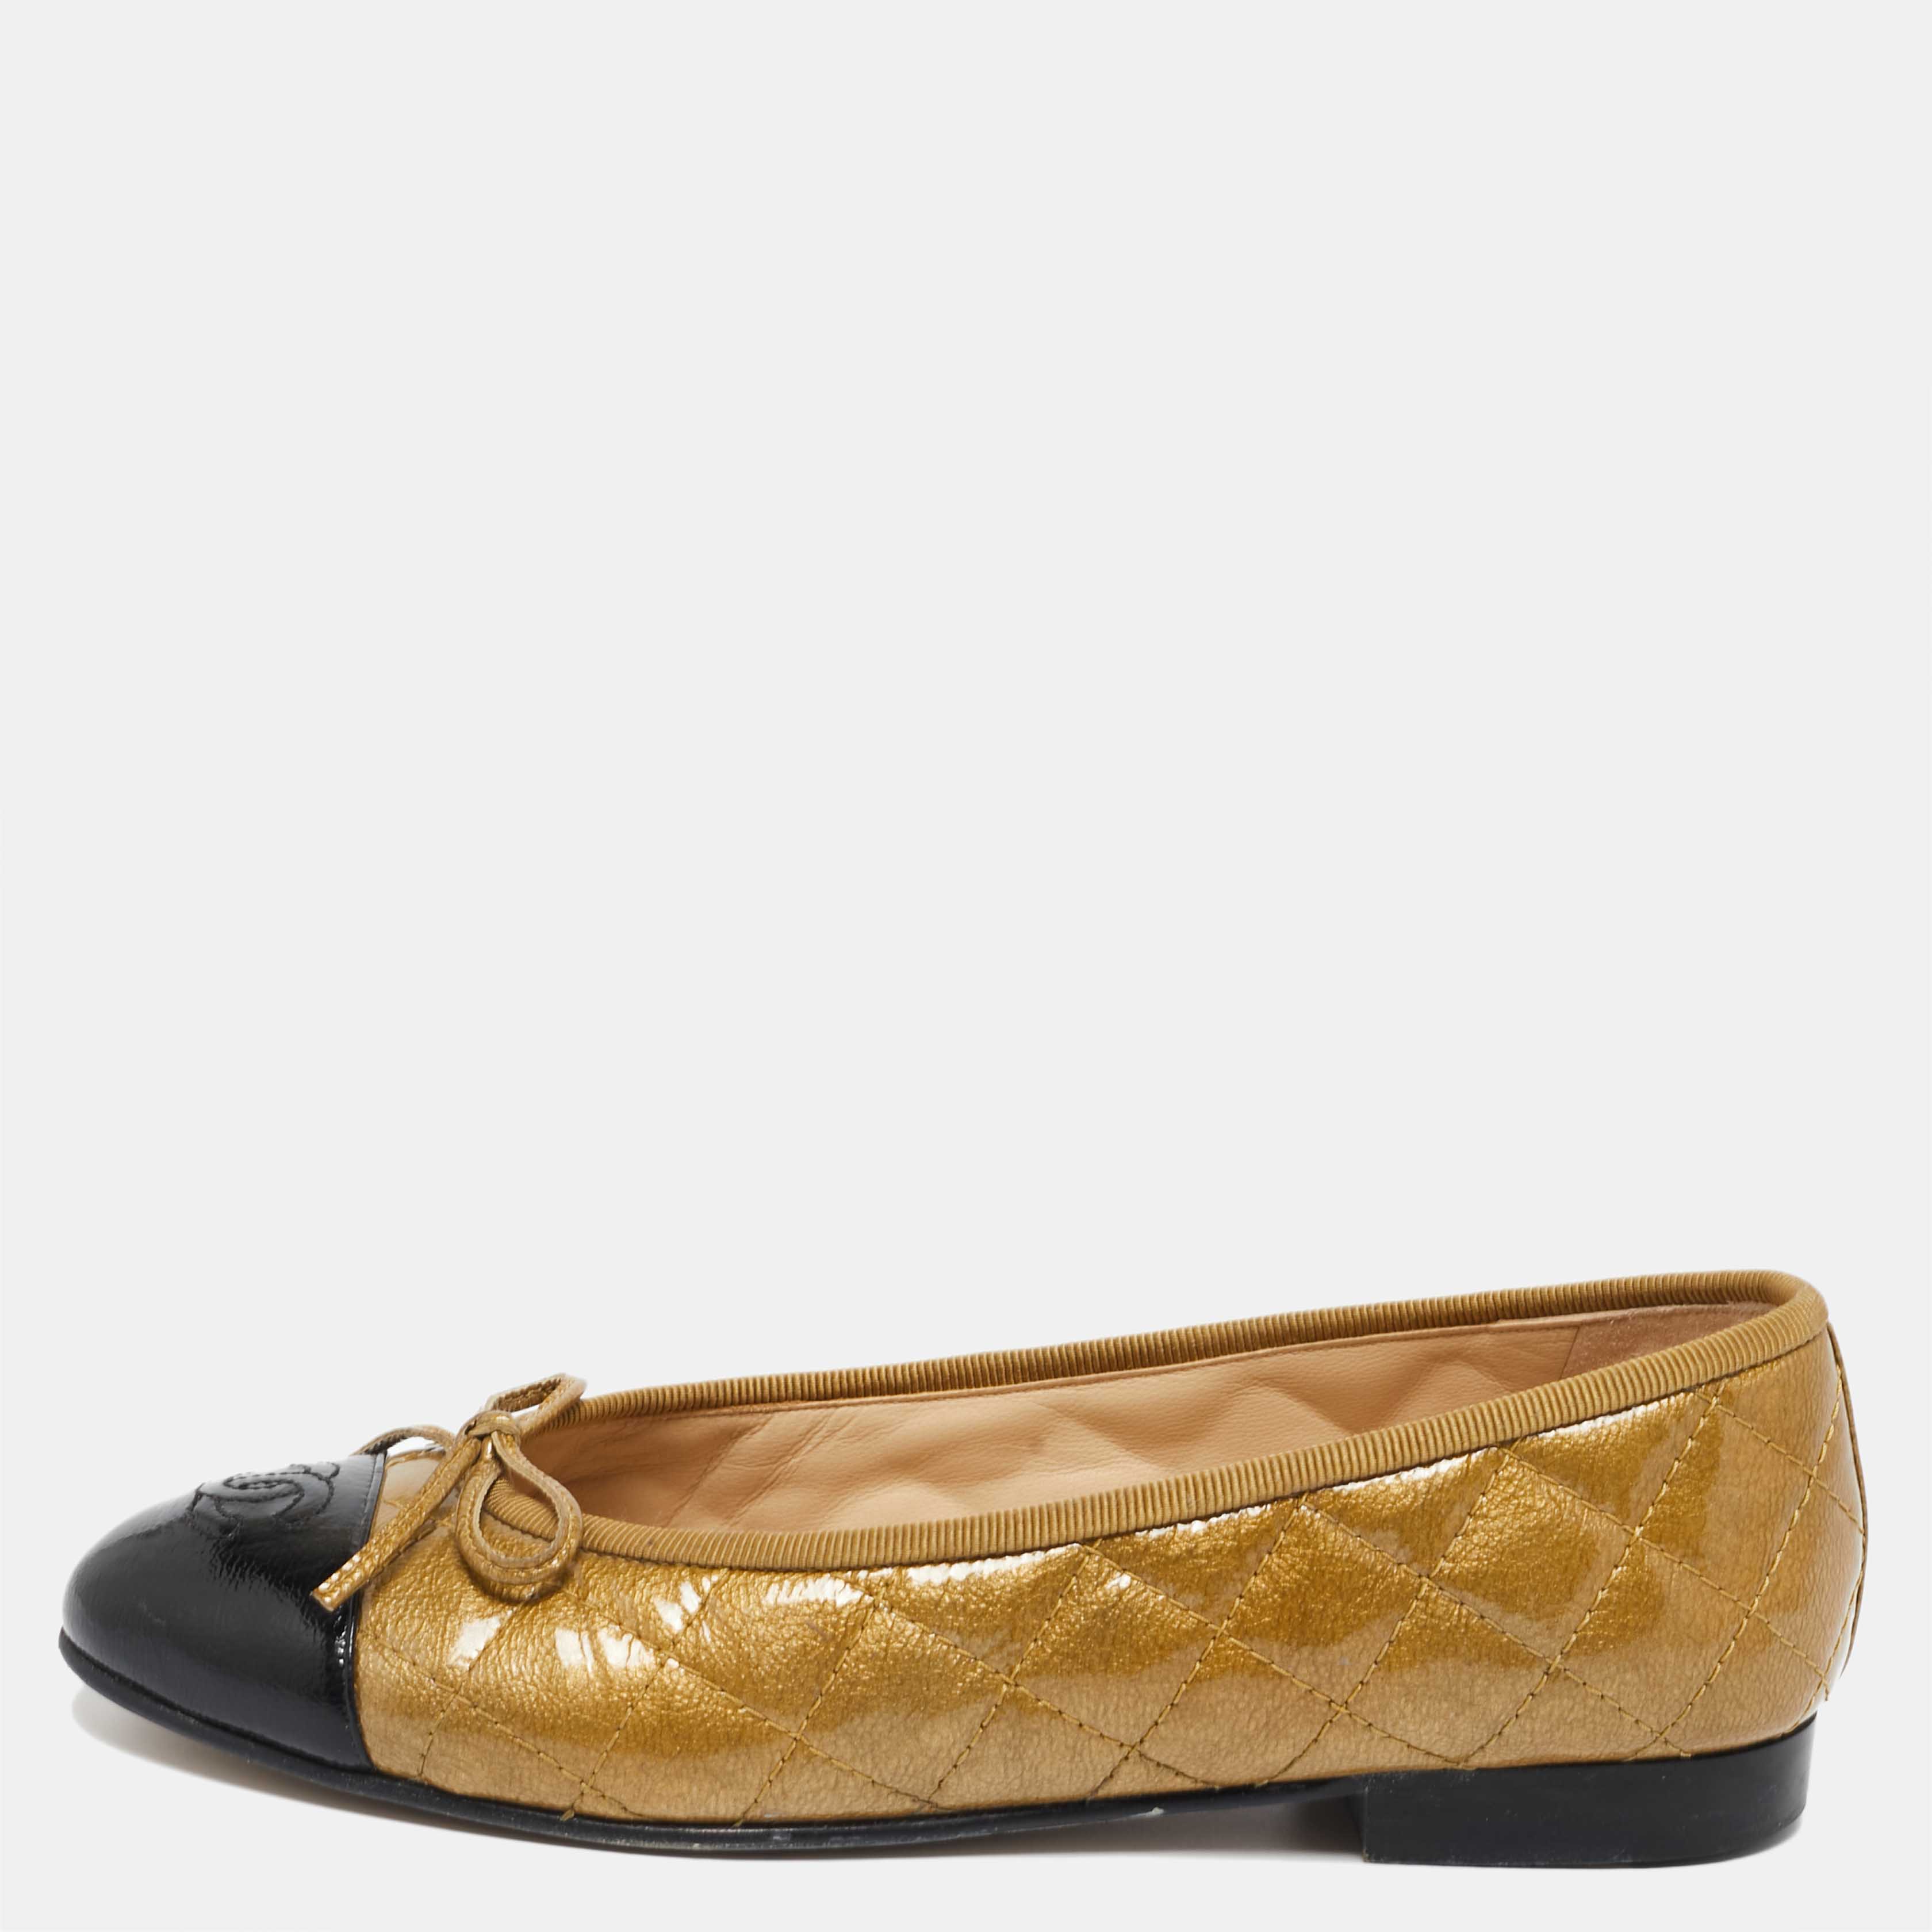 Chanel Black/Gold Quilted Patent CC Bow Ballet Flats Size 36.5 Chanel